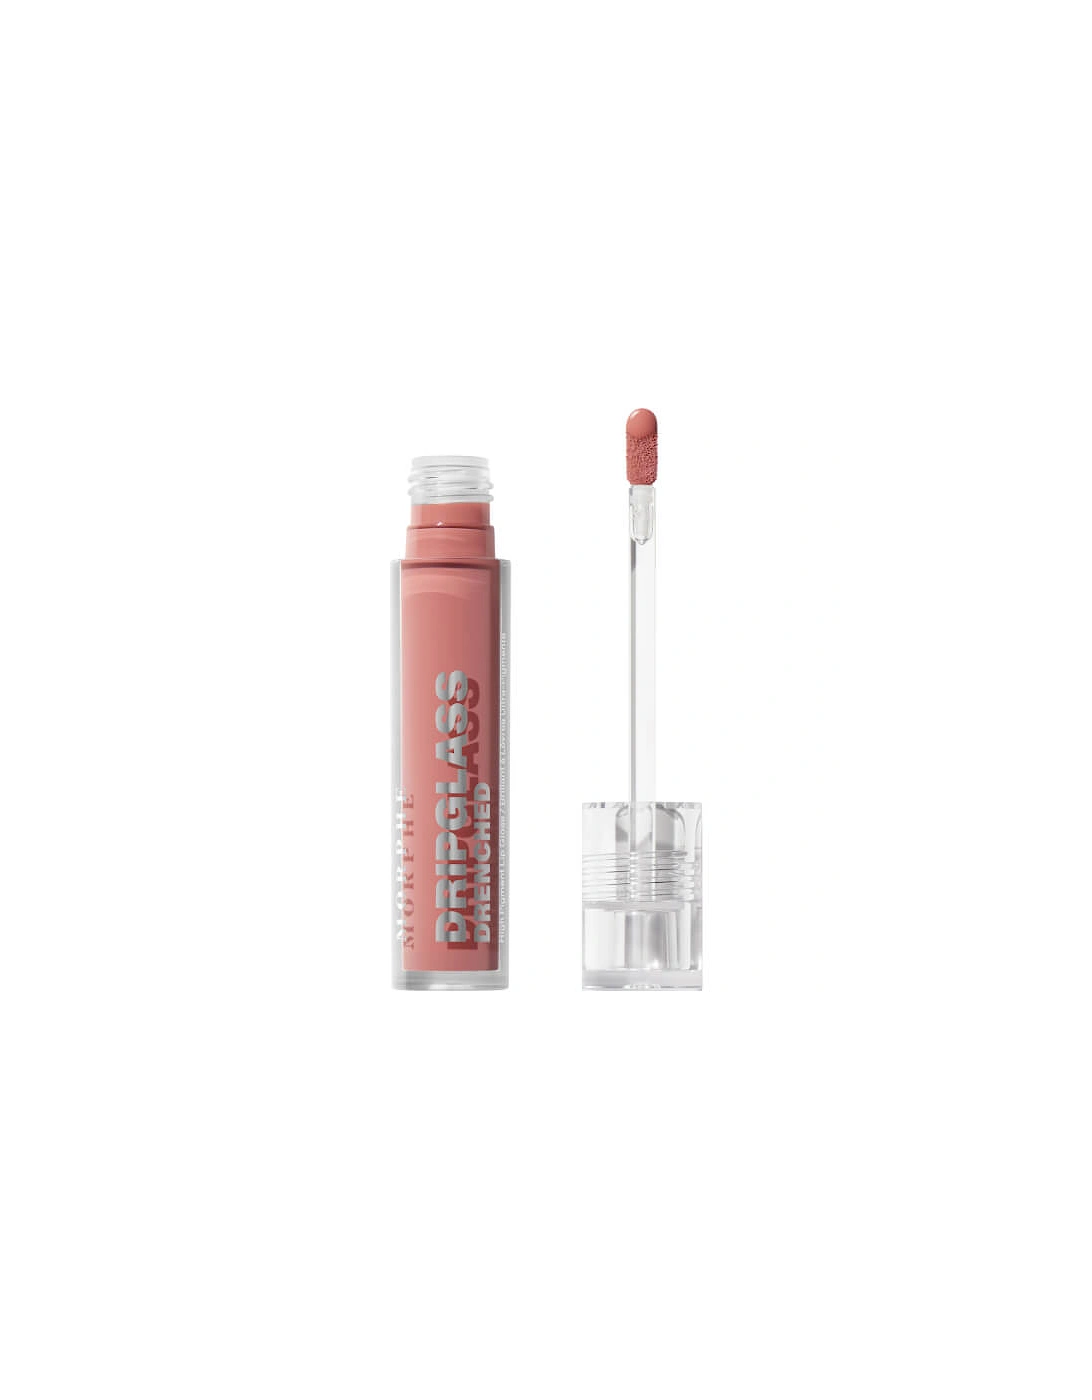 Dripglass Drenched High Pigment Lip Gloss - Wet Peach, 2 of 1